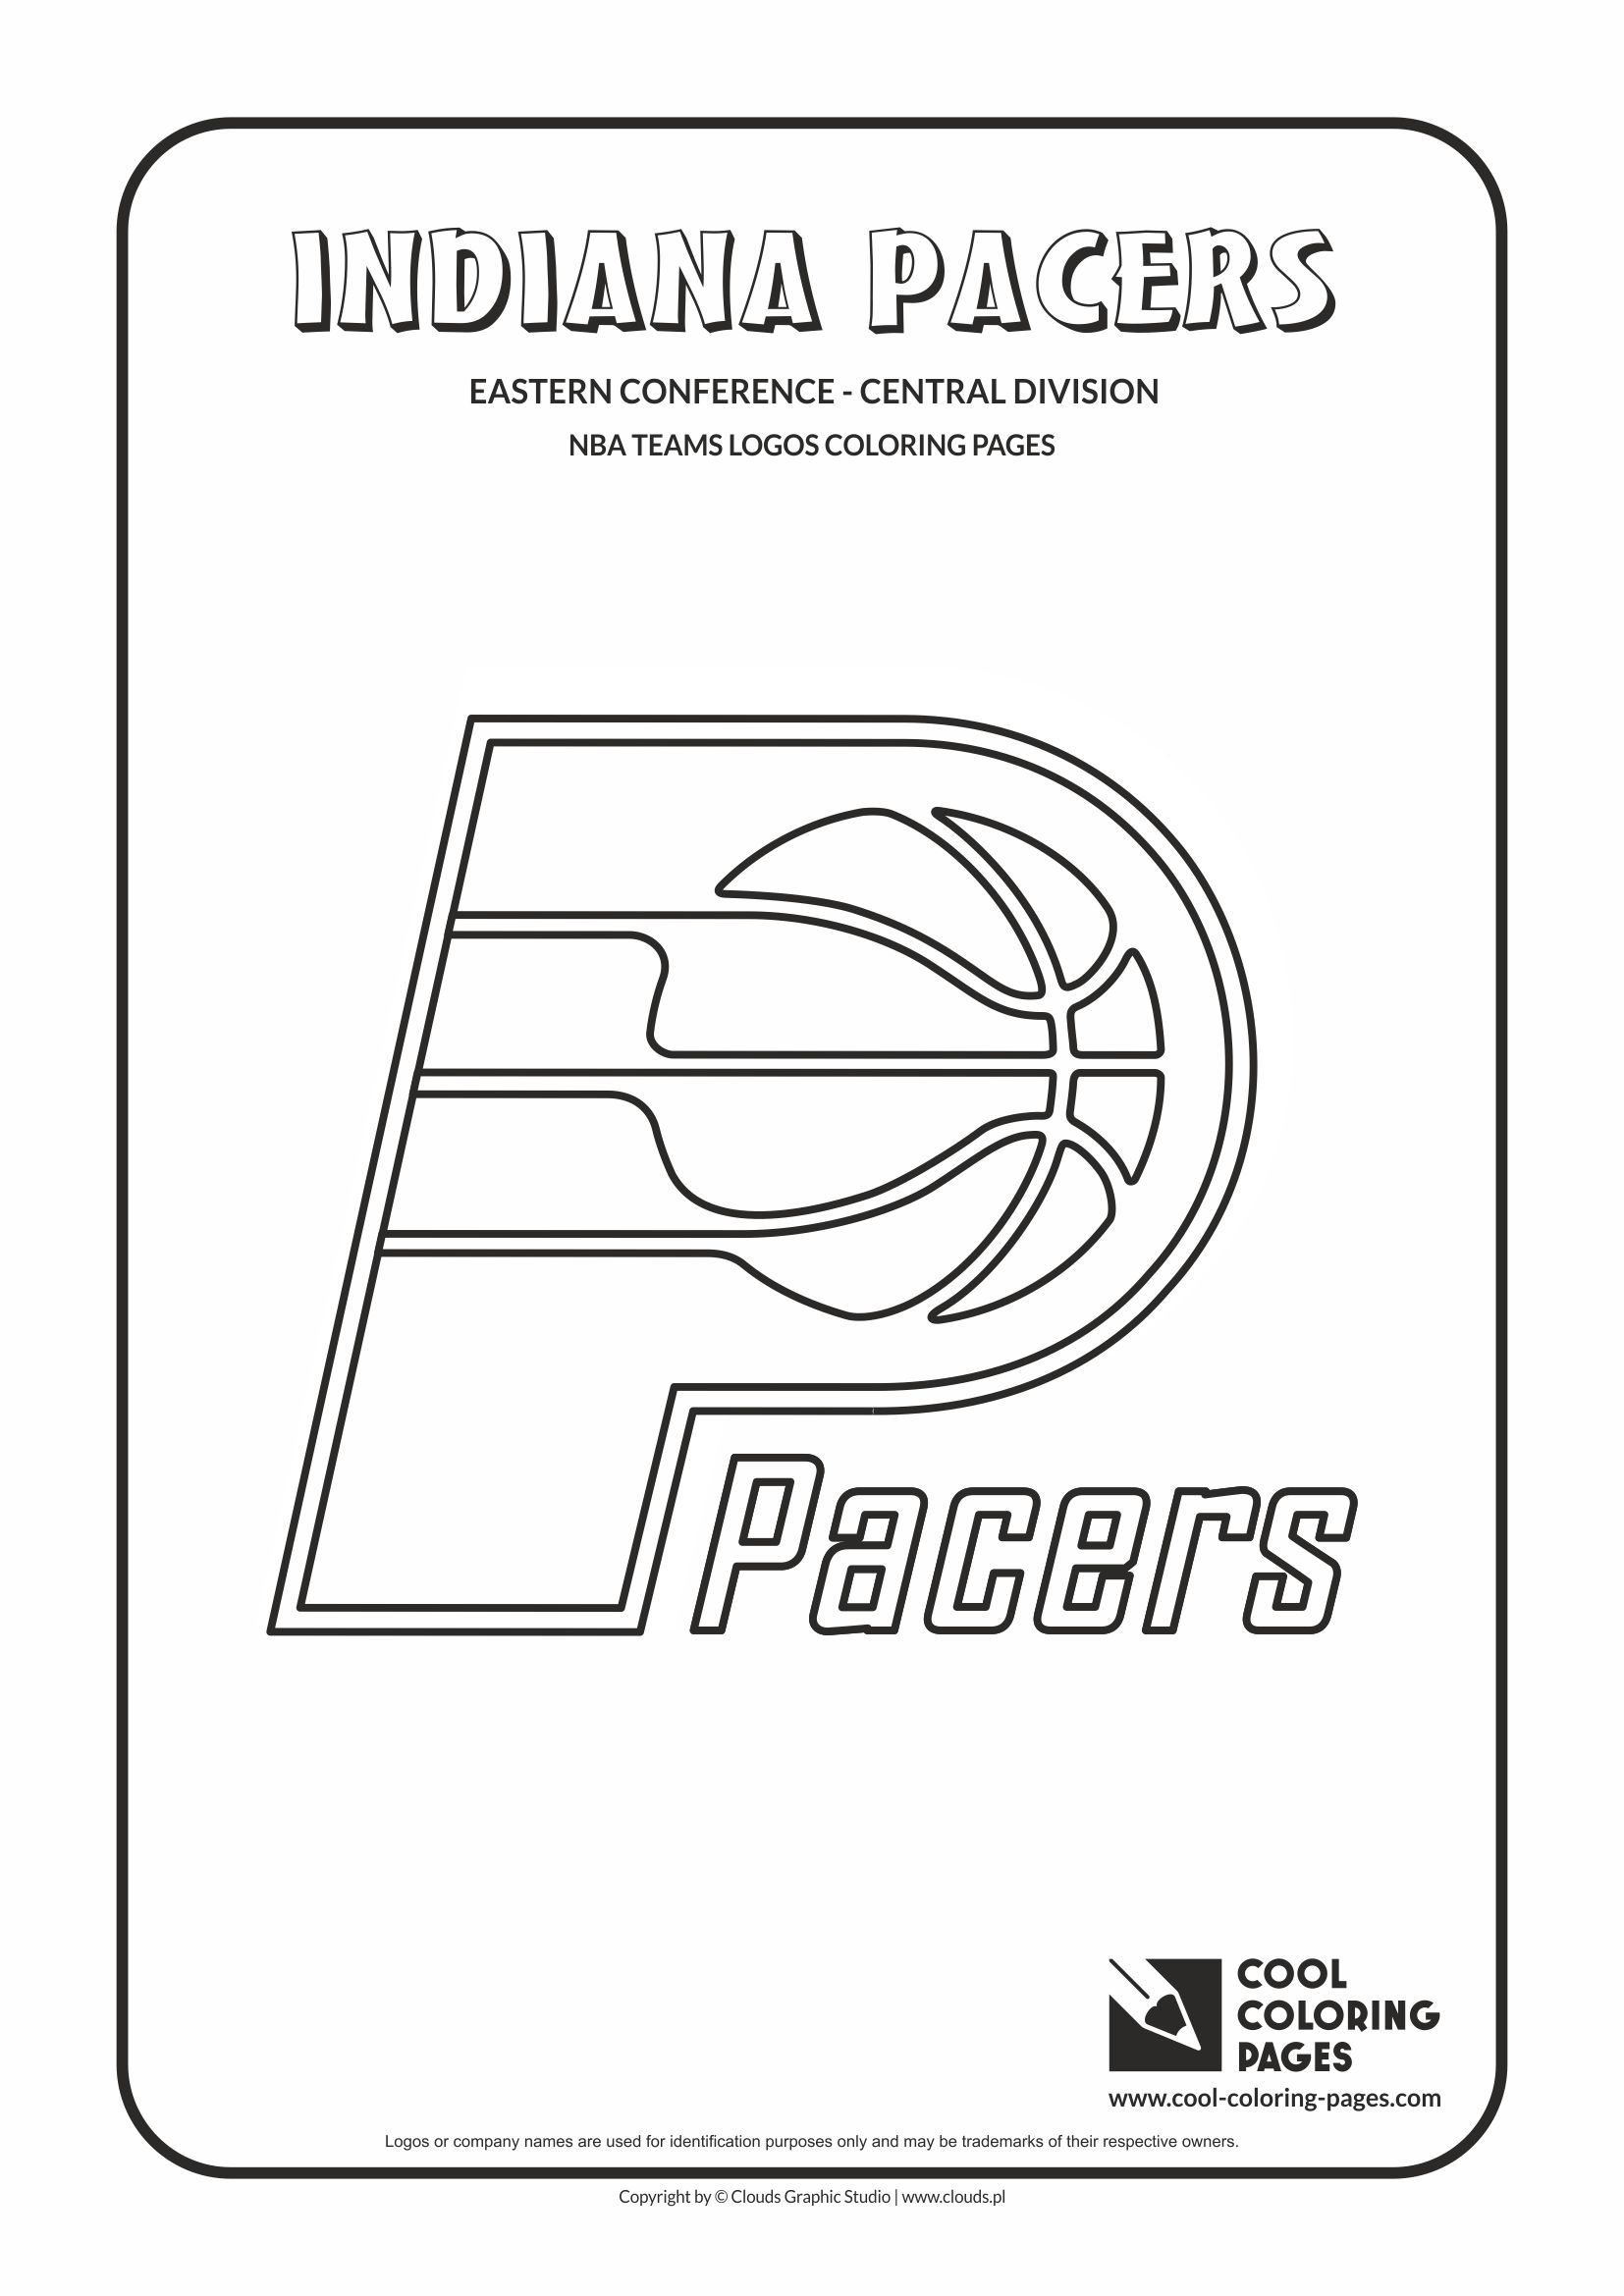 Cool Coloring Pages Indiana Pacers - NBA basketball teams logos ...